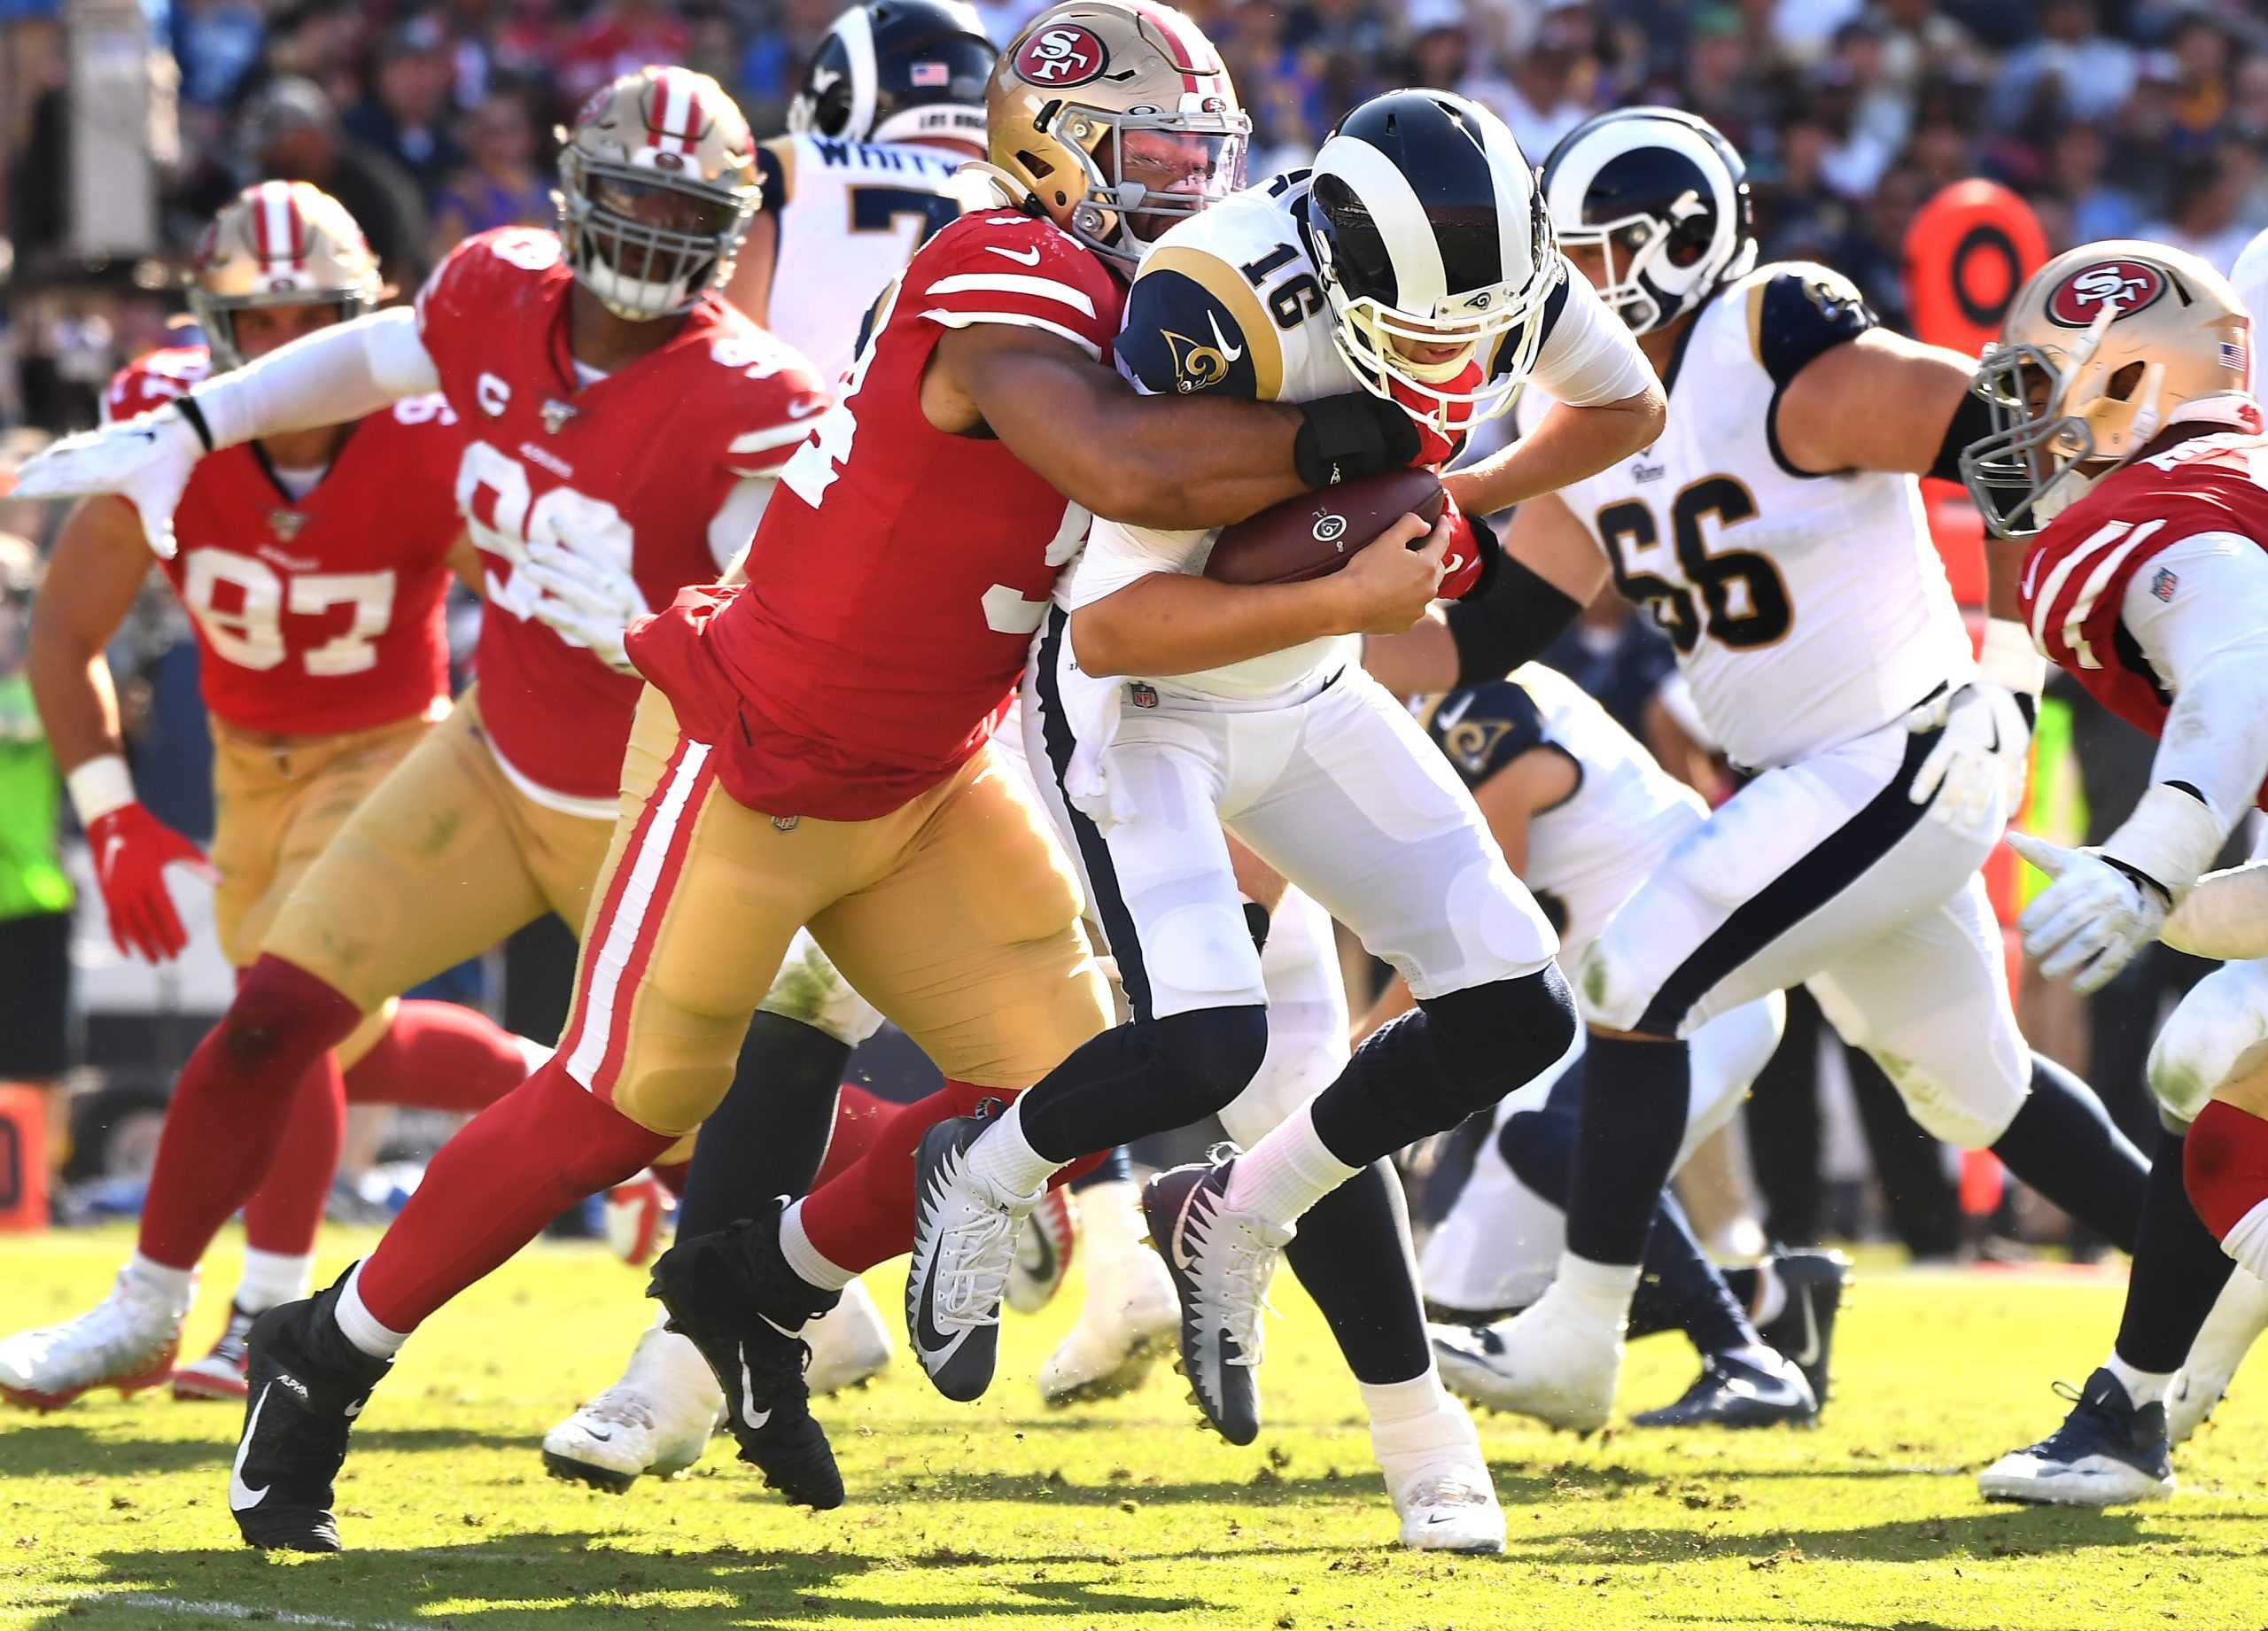 LOS ANGELES, CALIFORNIA OCTOBER 13, 2019-Rams Jared Goff is sacked by 49ers defensive lineman Solomon Thomas in the 3rd quarter at the Coliseum Sunday. (Wally Skalij/Los Angeles Times)